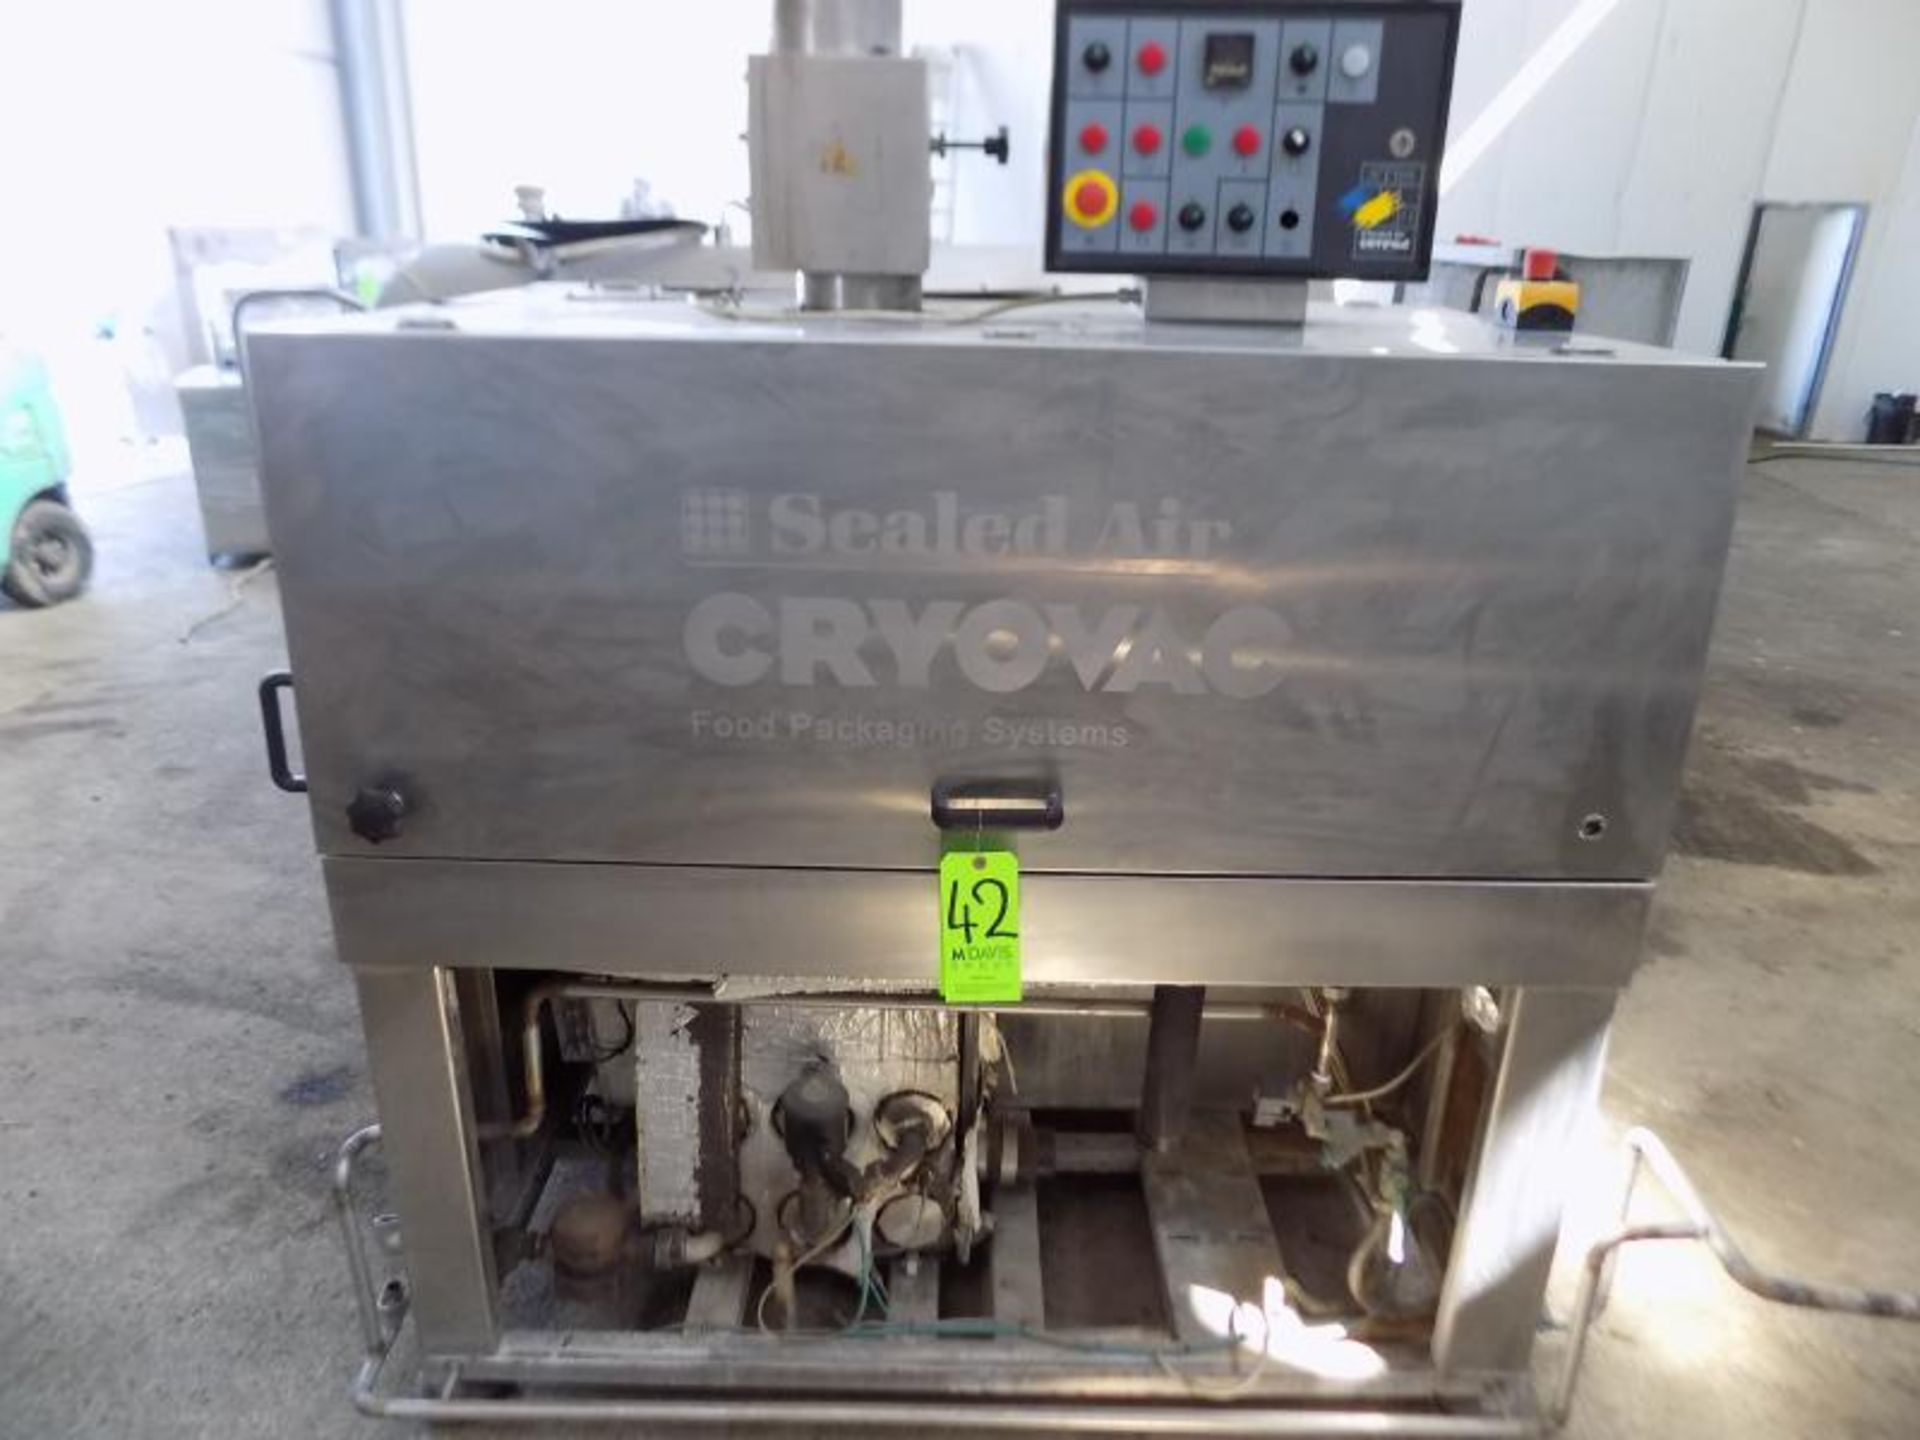 2007 Sealed Air S/S Cryovac Food Packaging Systems, Model ST98-600 STEAM, S/N A54301323